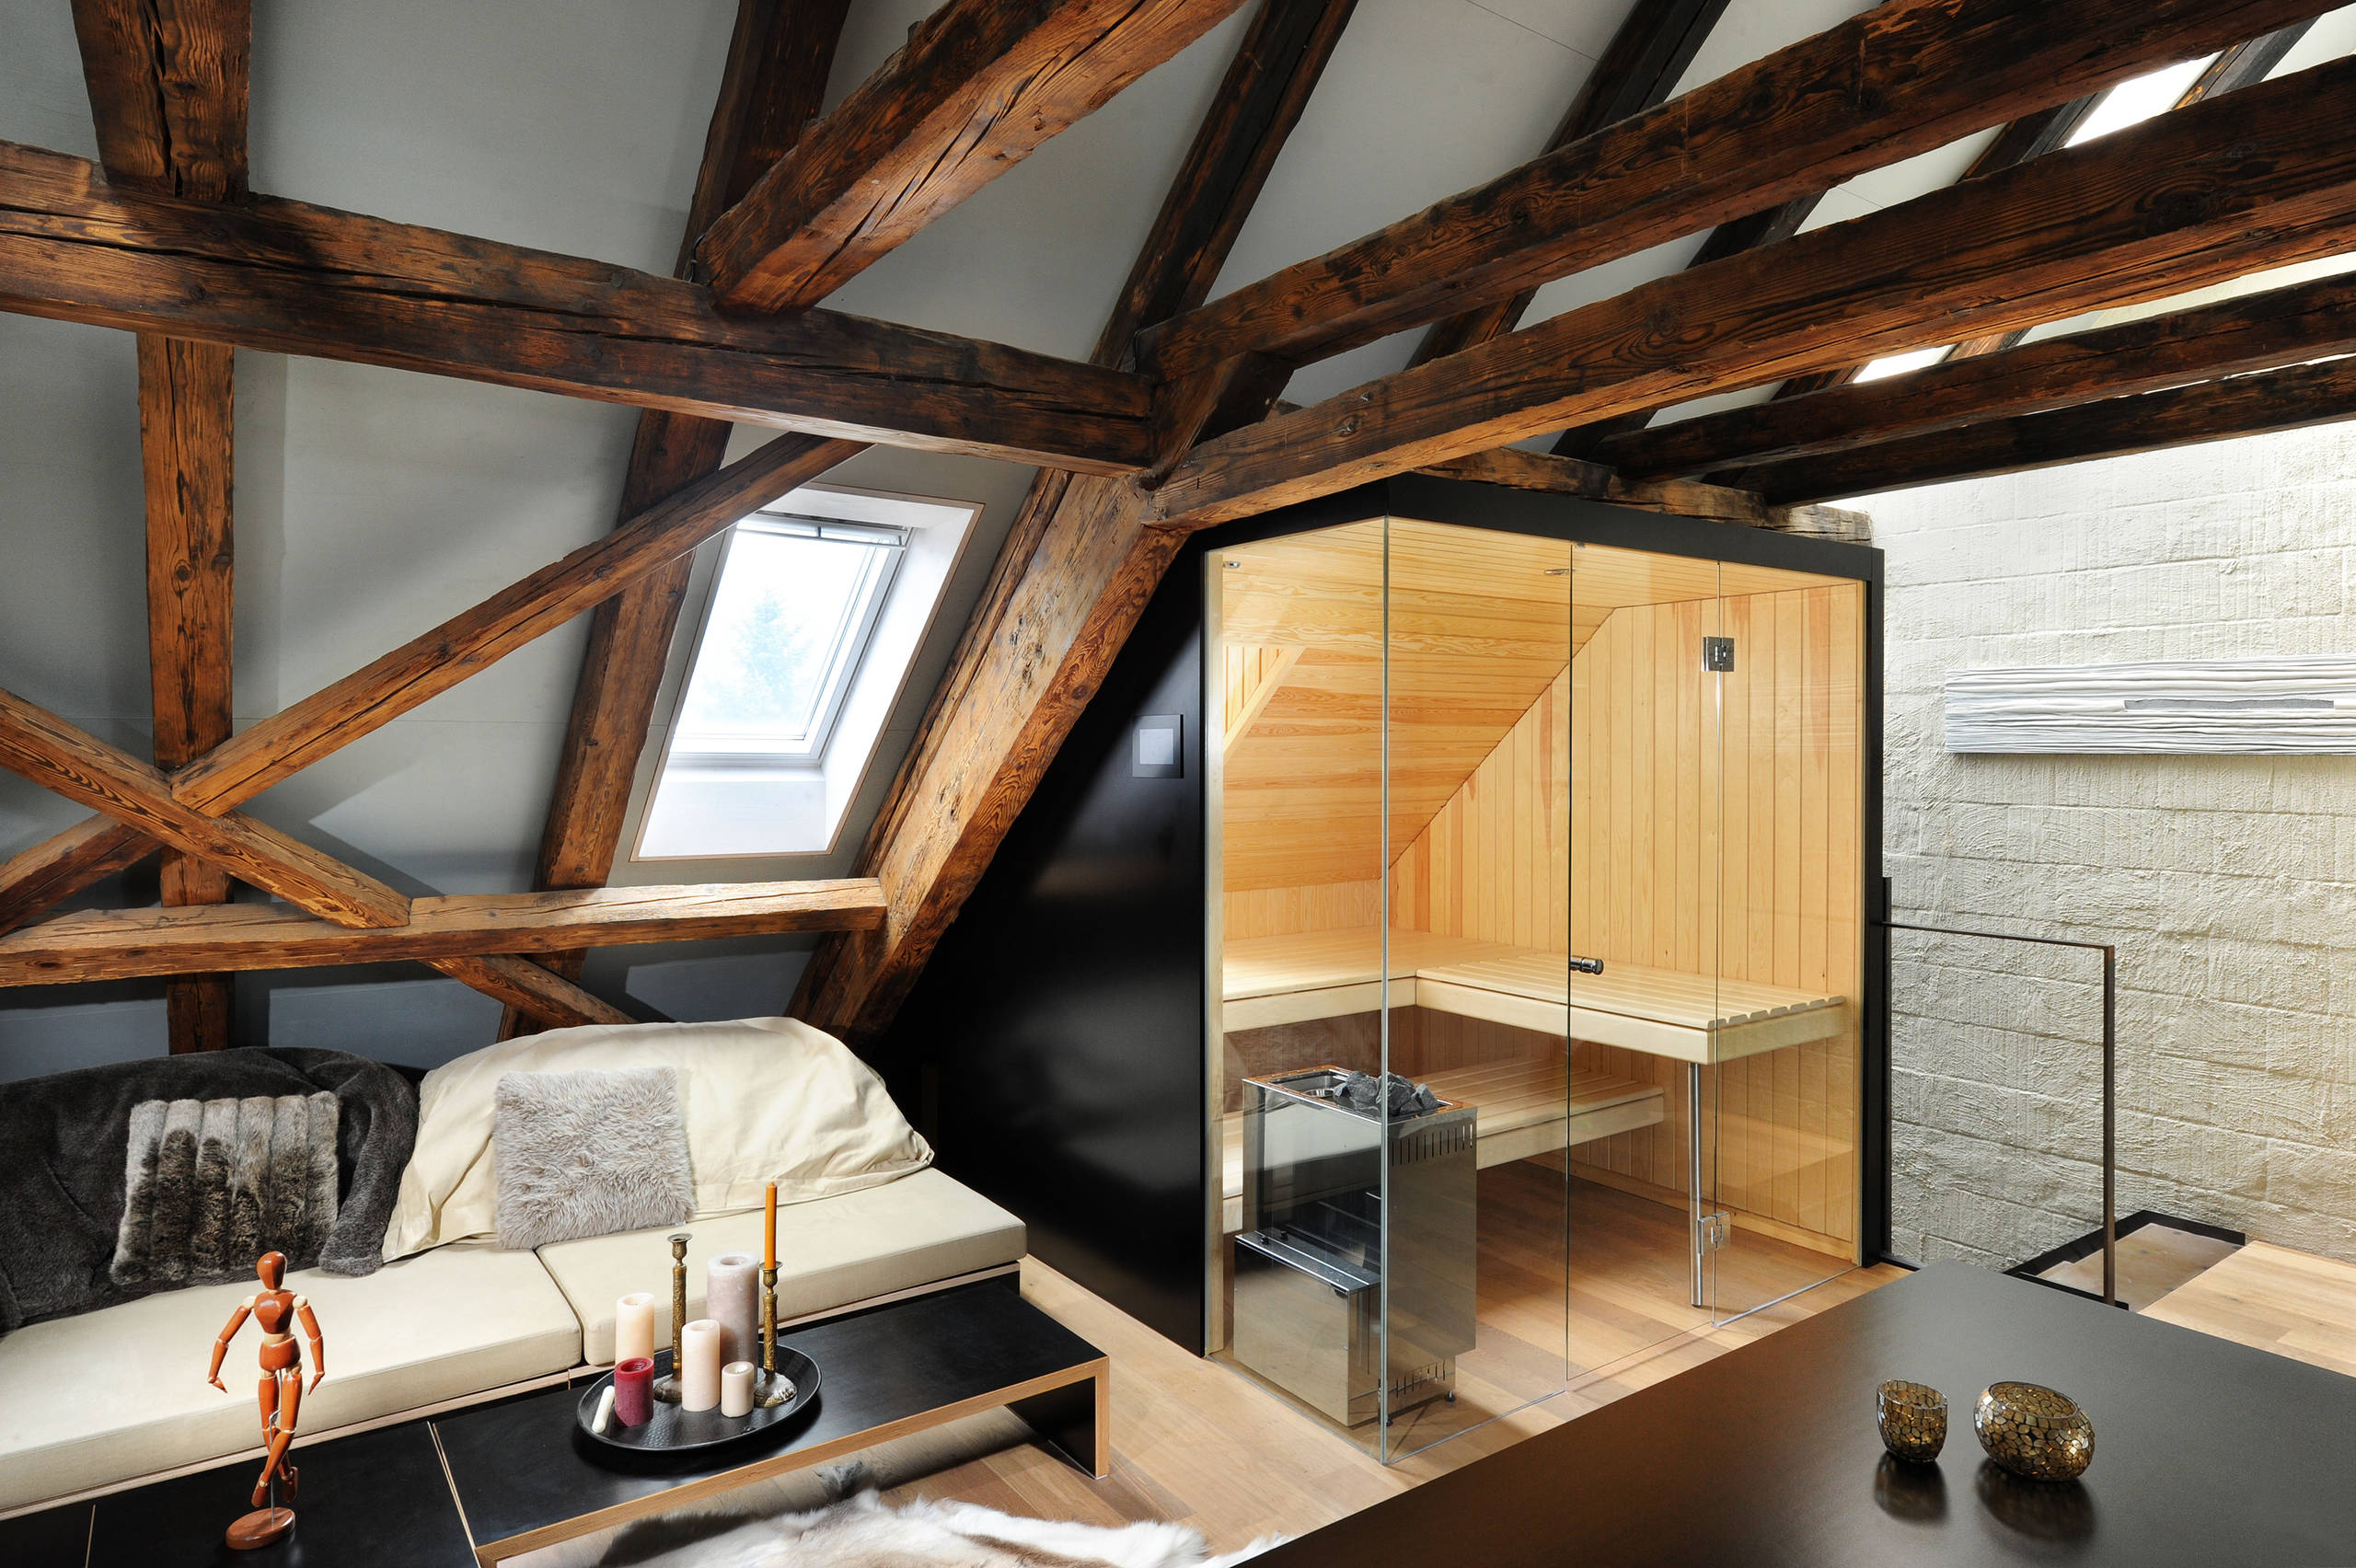 Bathroom Planning: Can I Install a Sauna in My Home? | Houzz UK